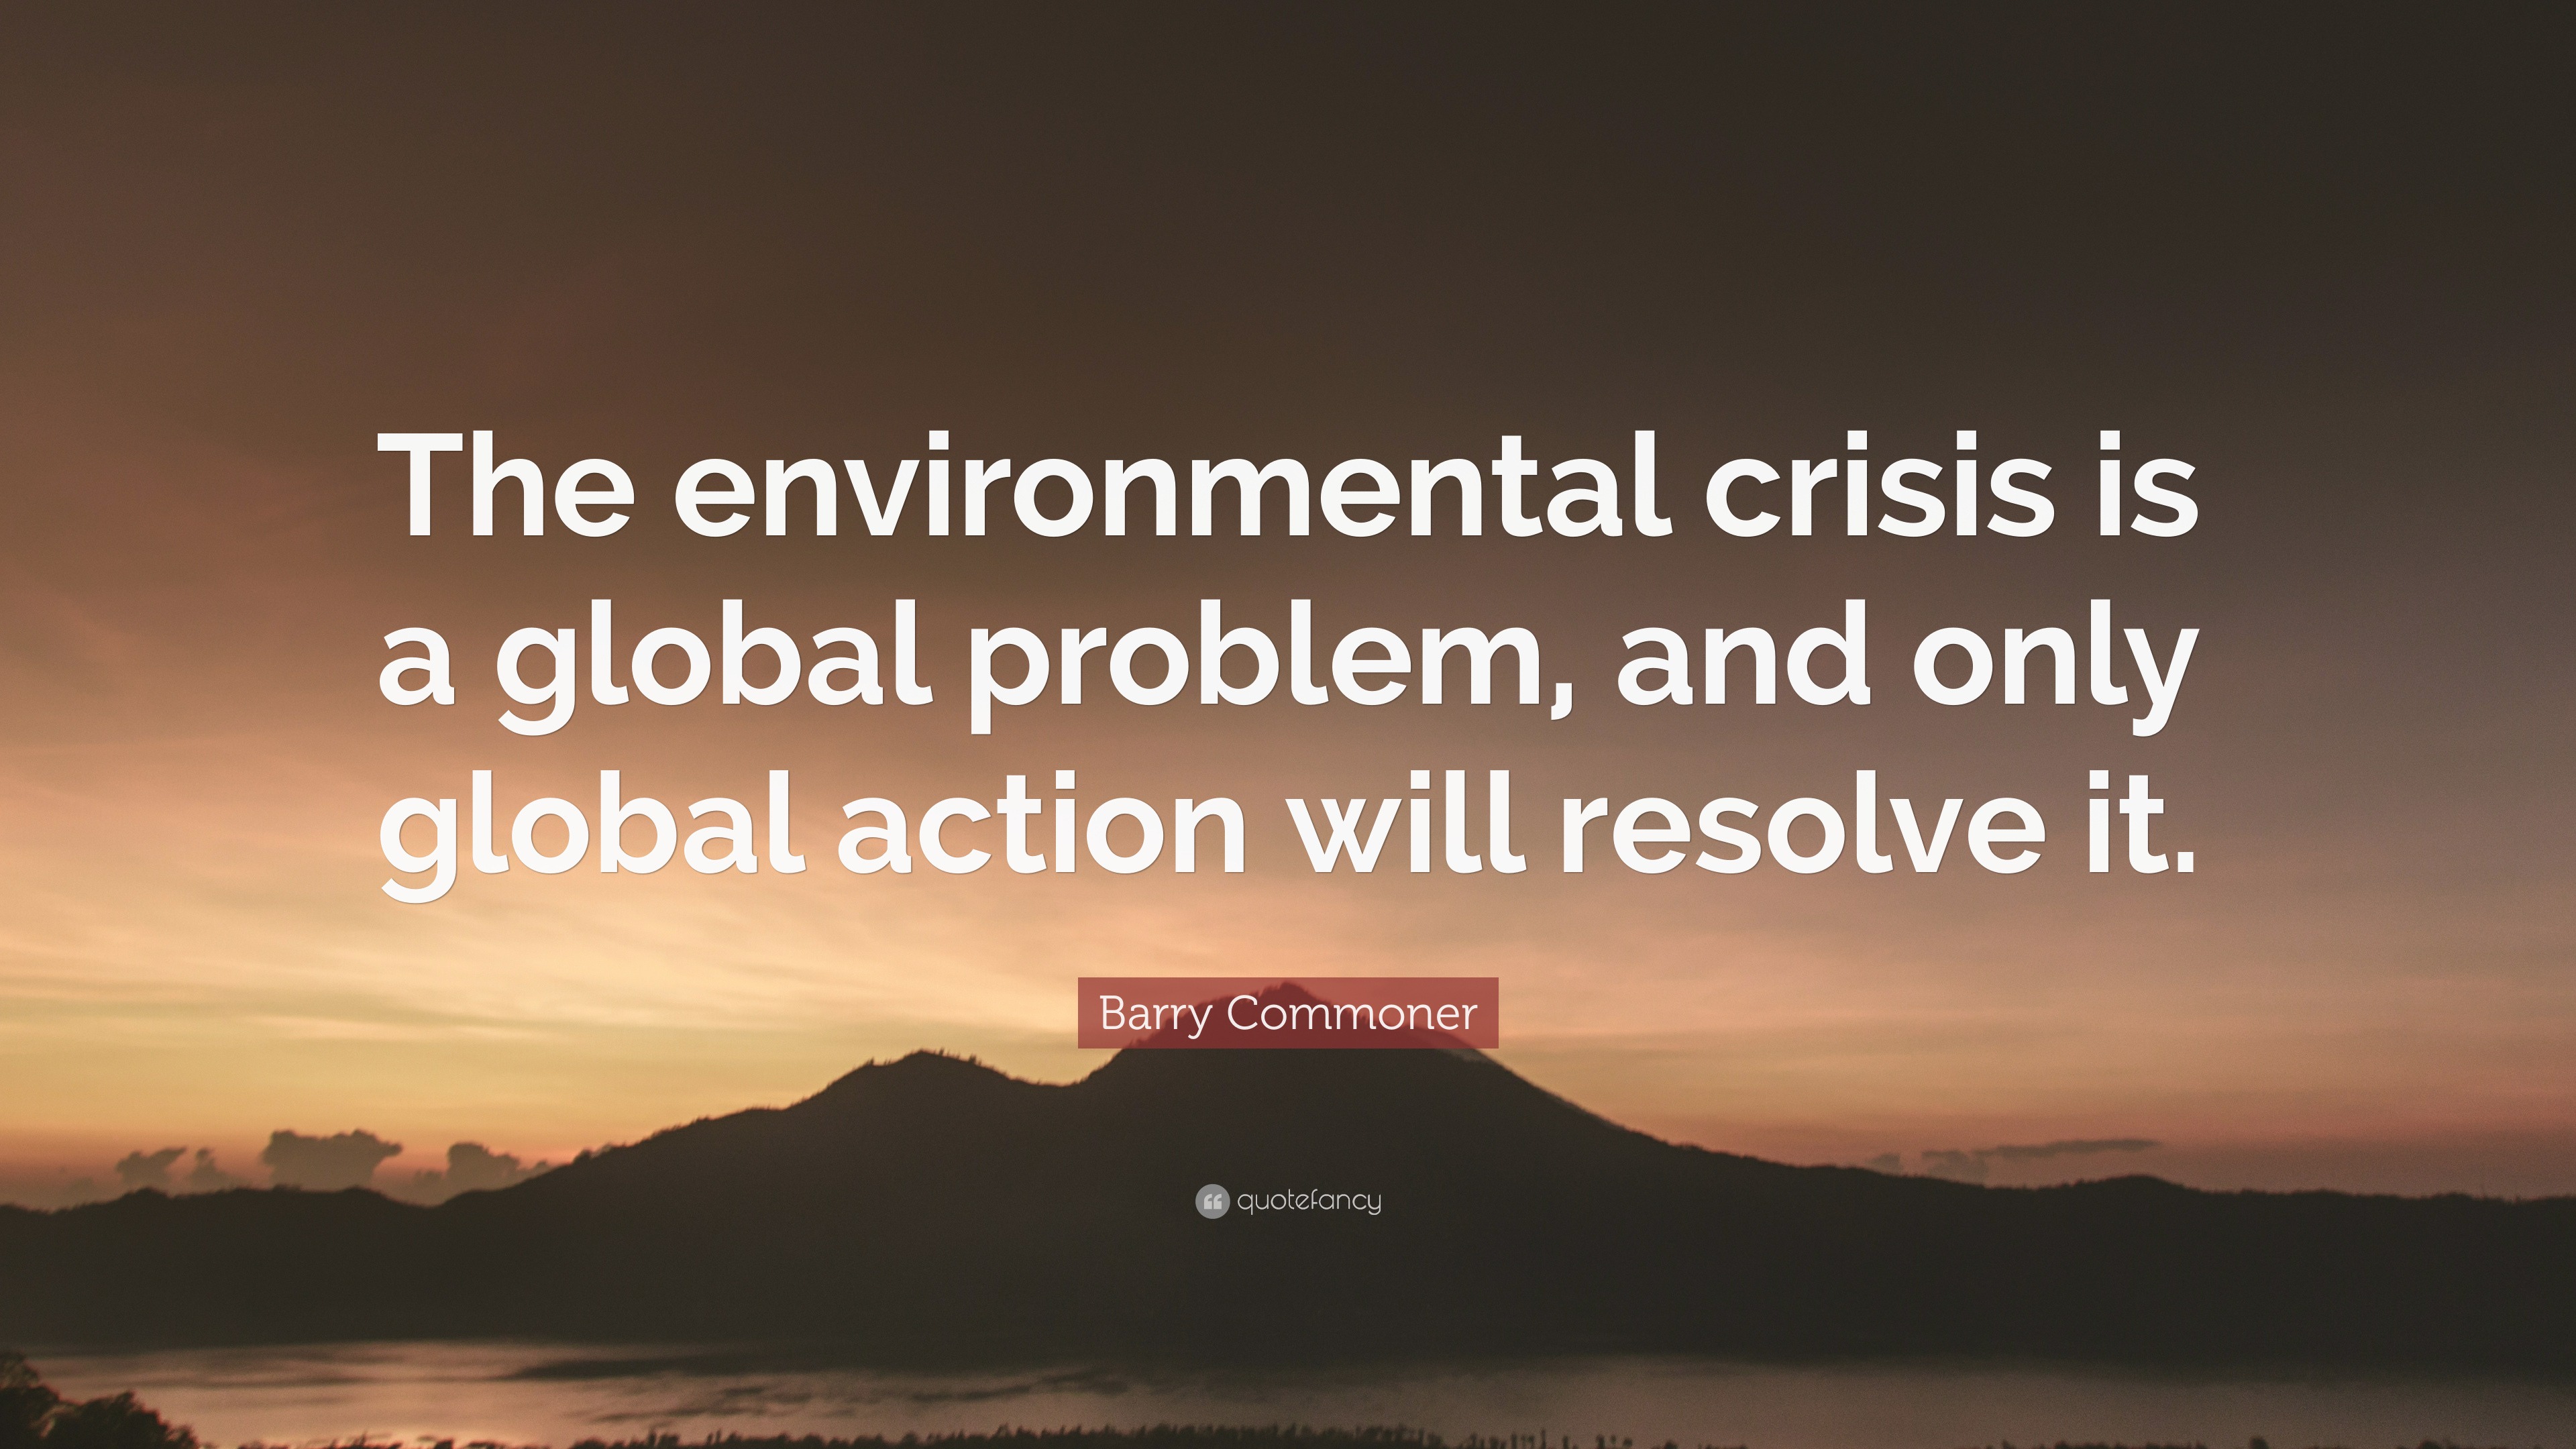 Barry Commoner Quote: “The environmental crisis is a global problem